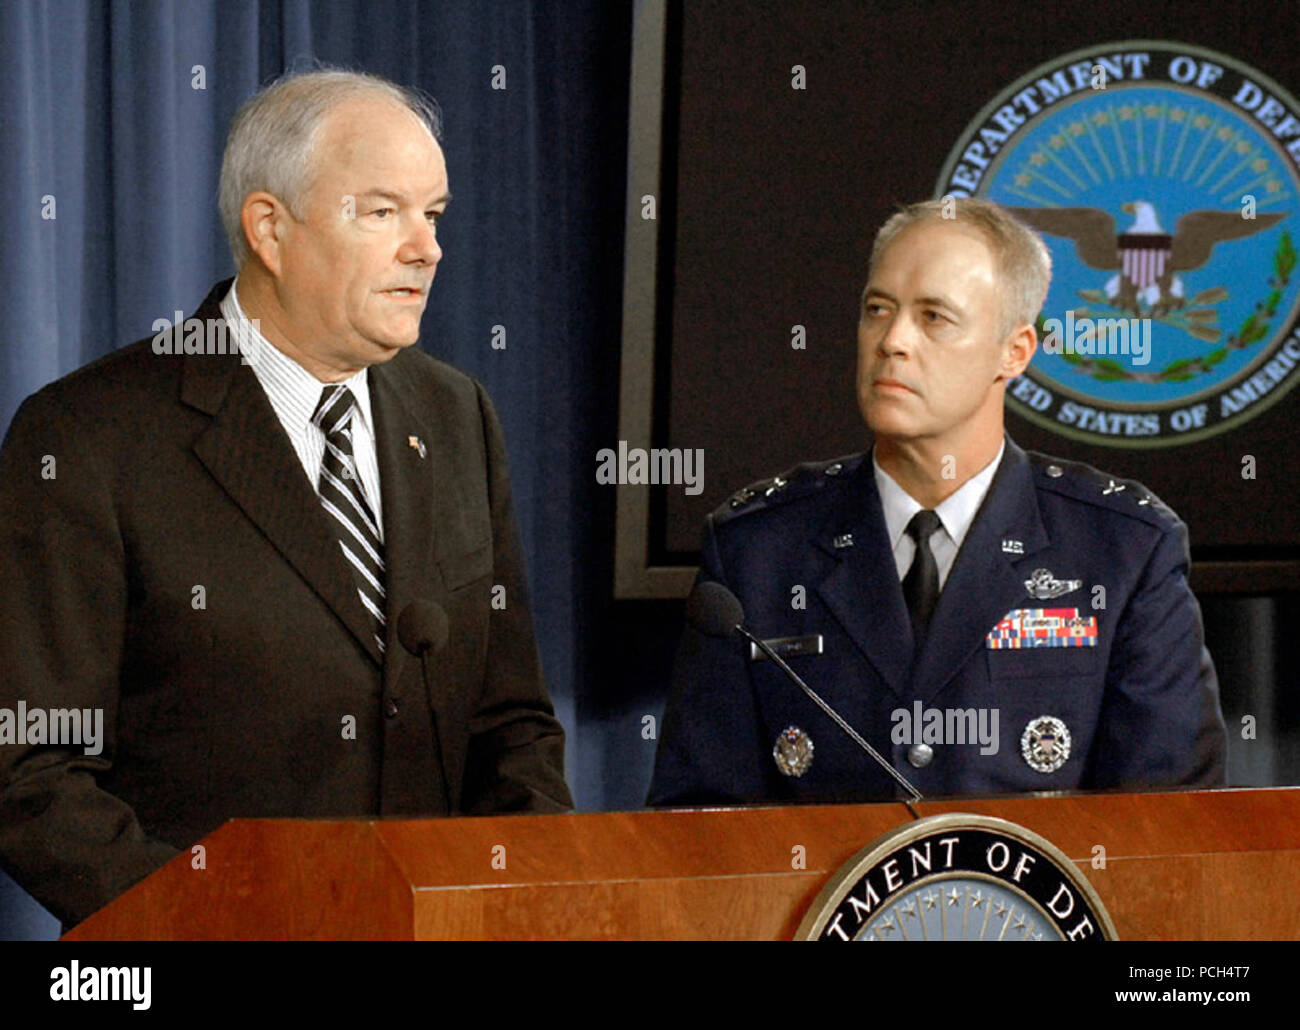 Secretary of the Air Force Michael W. Wynne, joined by Air Force Maj. Gen. Richard Newton, deputy chief of staff for operations, plans and requirements, Headquarters, U.S. Air Force, holds a press conference at the Pentagon, Oct. 19, 2007, to talk about an incident which occurred on Aug. 30, 2007, involving the mishandling of nuclear weapons.  On that day, a weapons loading crew at Minot Air Force Base, N. D. accidentally loaded a pylon of nuclear armed air-launched cruise missiles on the wing of a B-52 bomber for transport Barksdale Air Force Base, La.  The error went undetected until the air Stock Photo